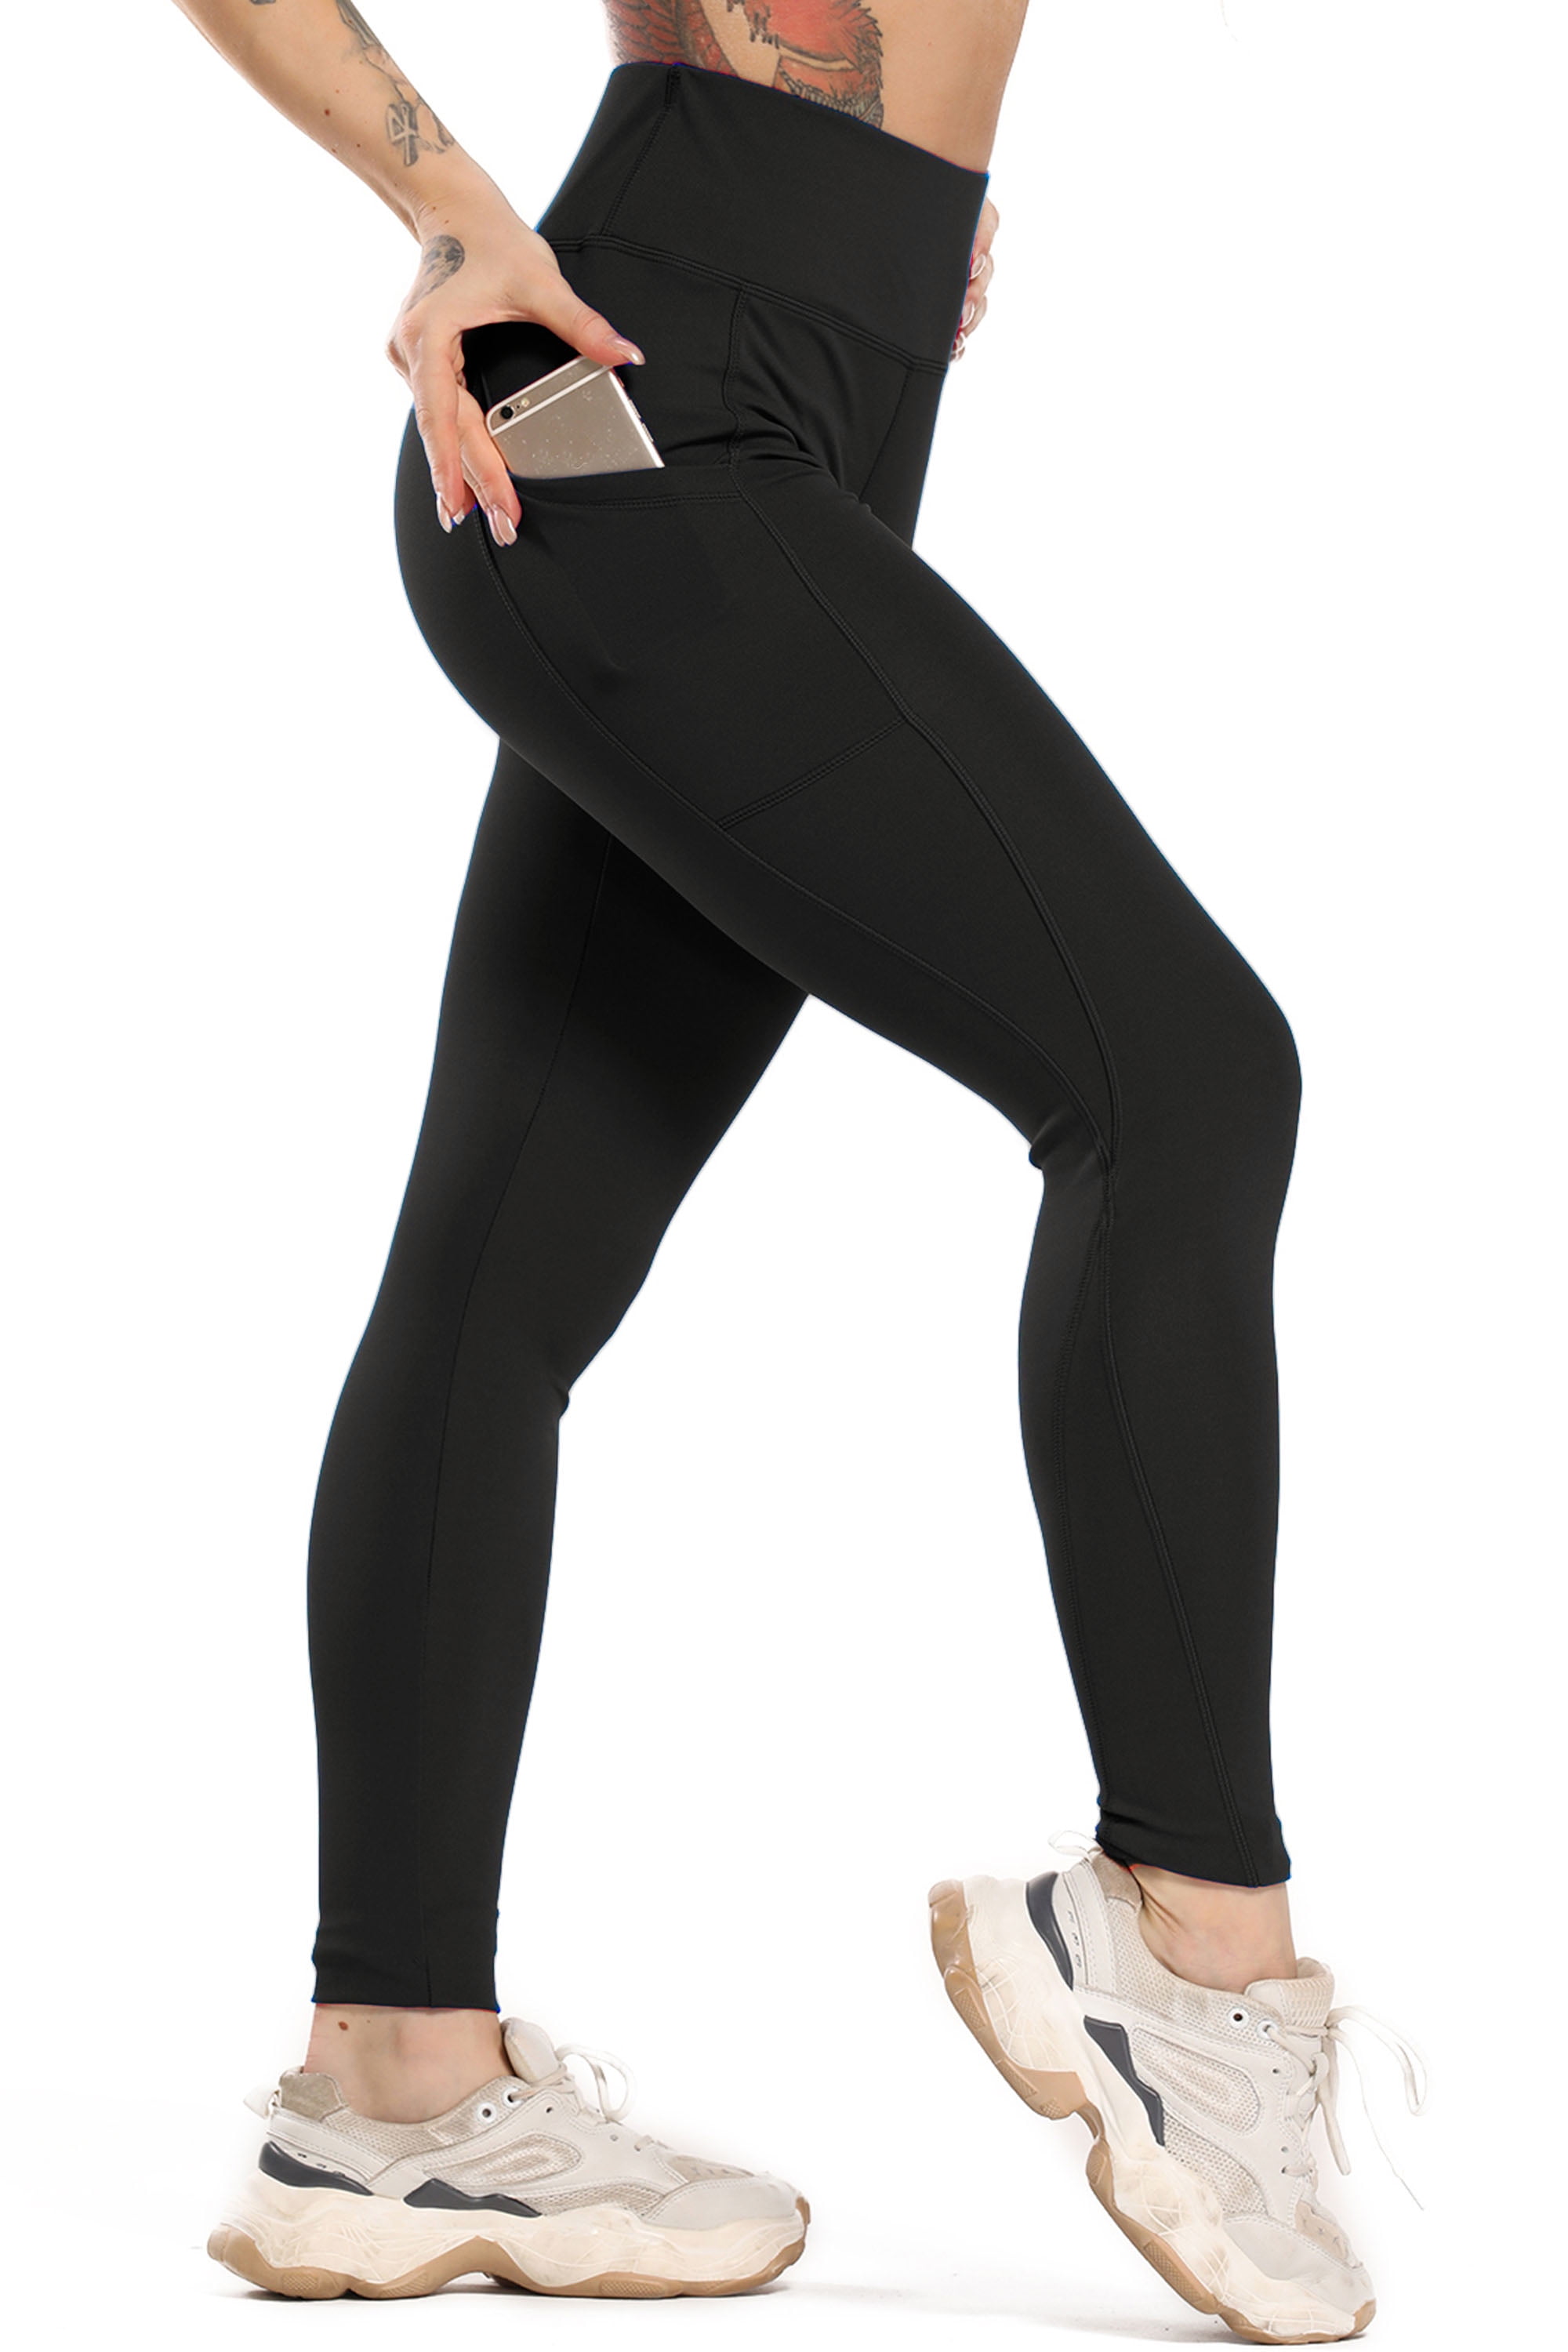 SYRINX High Waist Yoga Pants with Pockets for Women Tummy Control 4 Way Stretch Workout Running Yoga Leggings